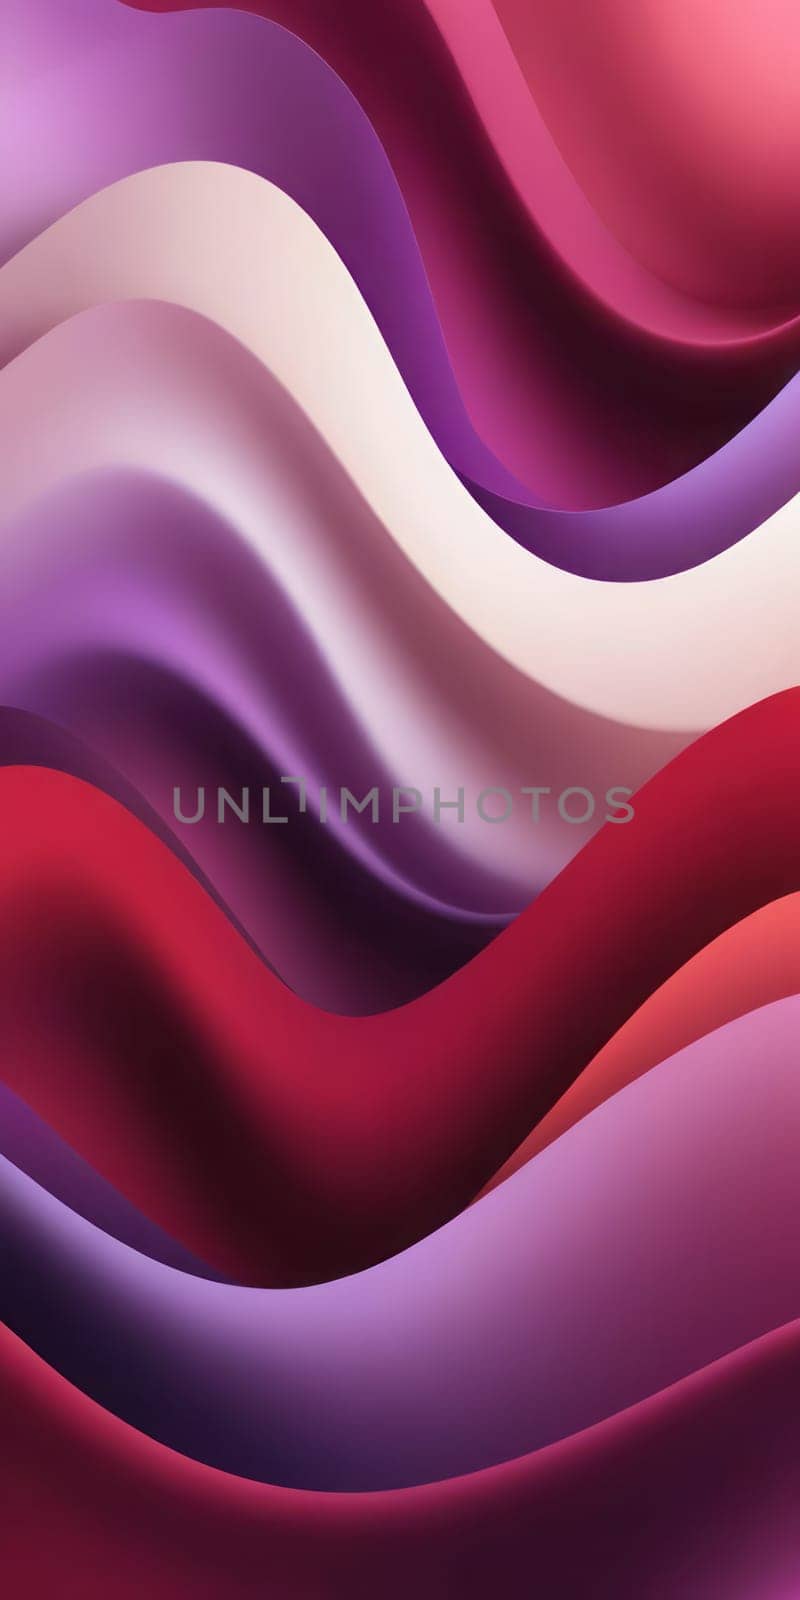 Distorted Shapes in Maroon Lavender by nkotlyar